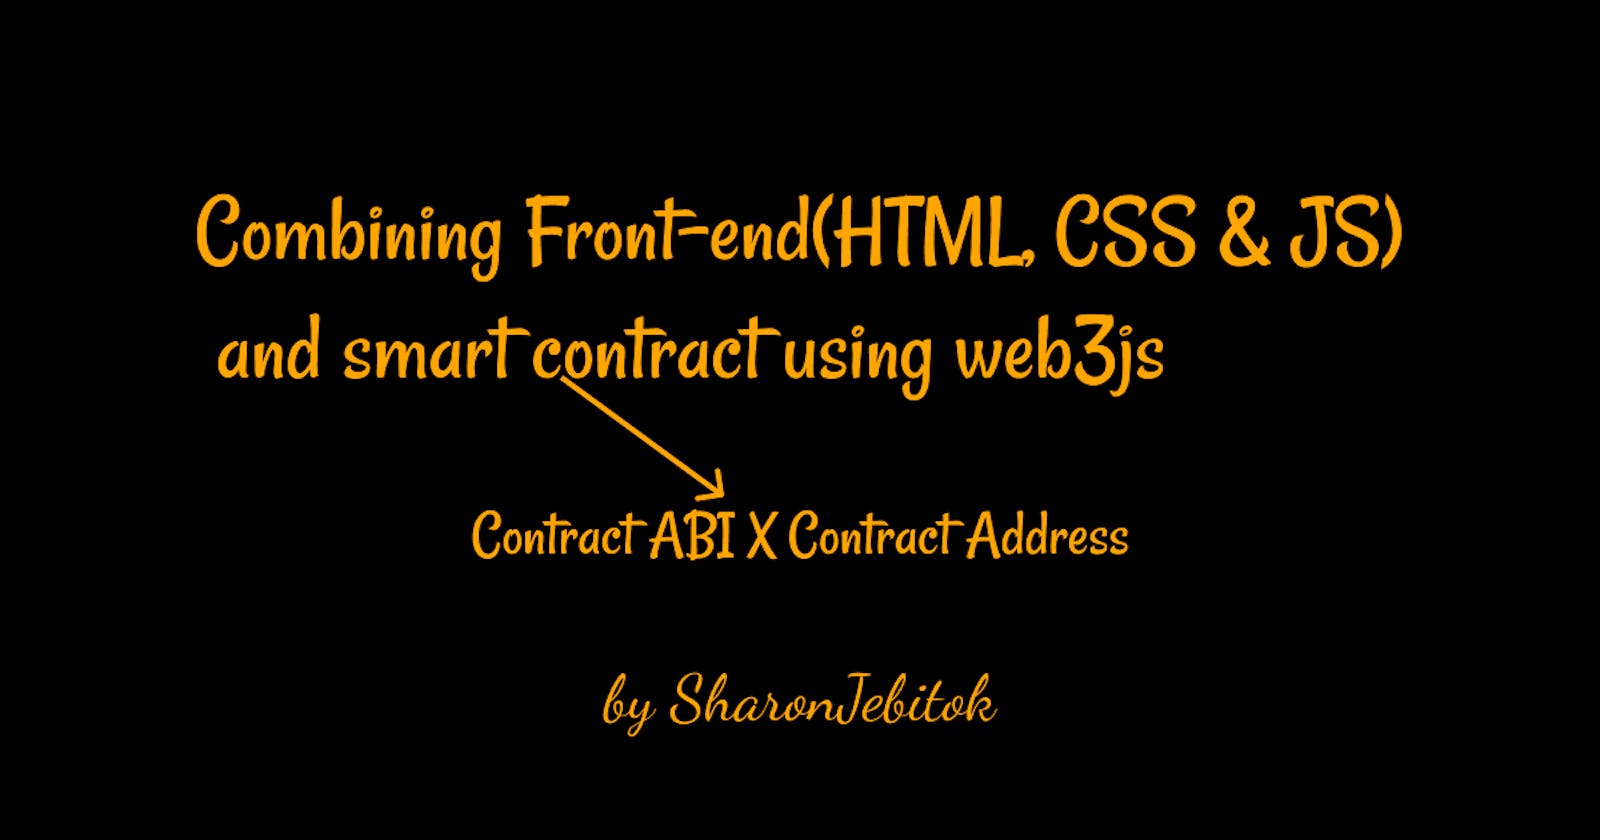 Combination of Front-end & Back-end using HTML, CSS & JavaScript(web3Js) to Interact with Smart Contract